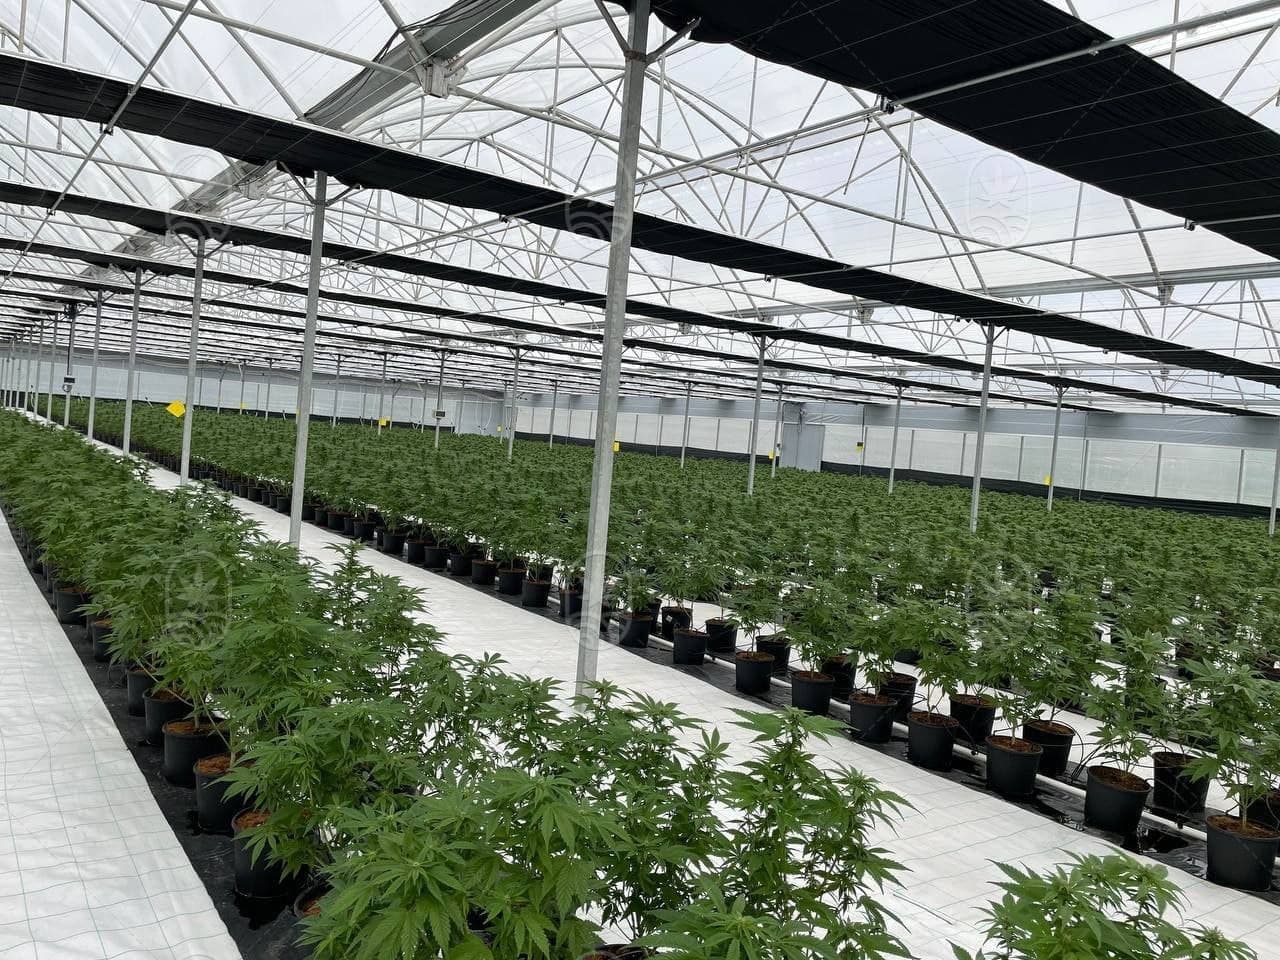 JuicyFields - Your cannabis plant could also grow here